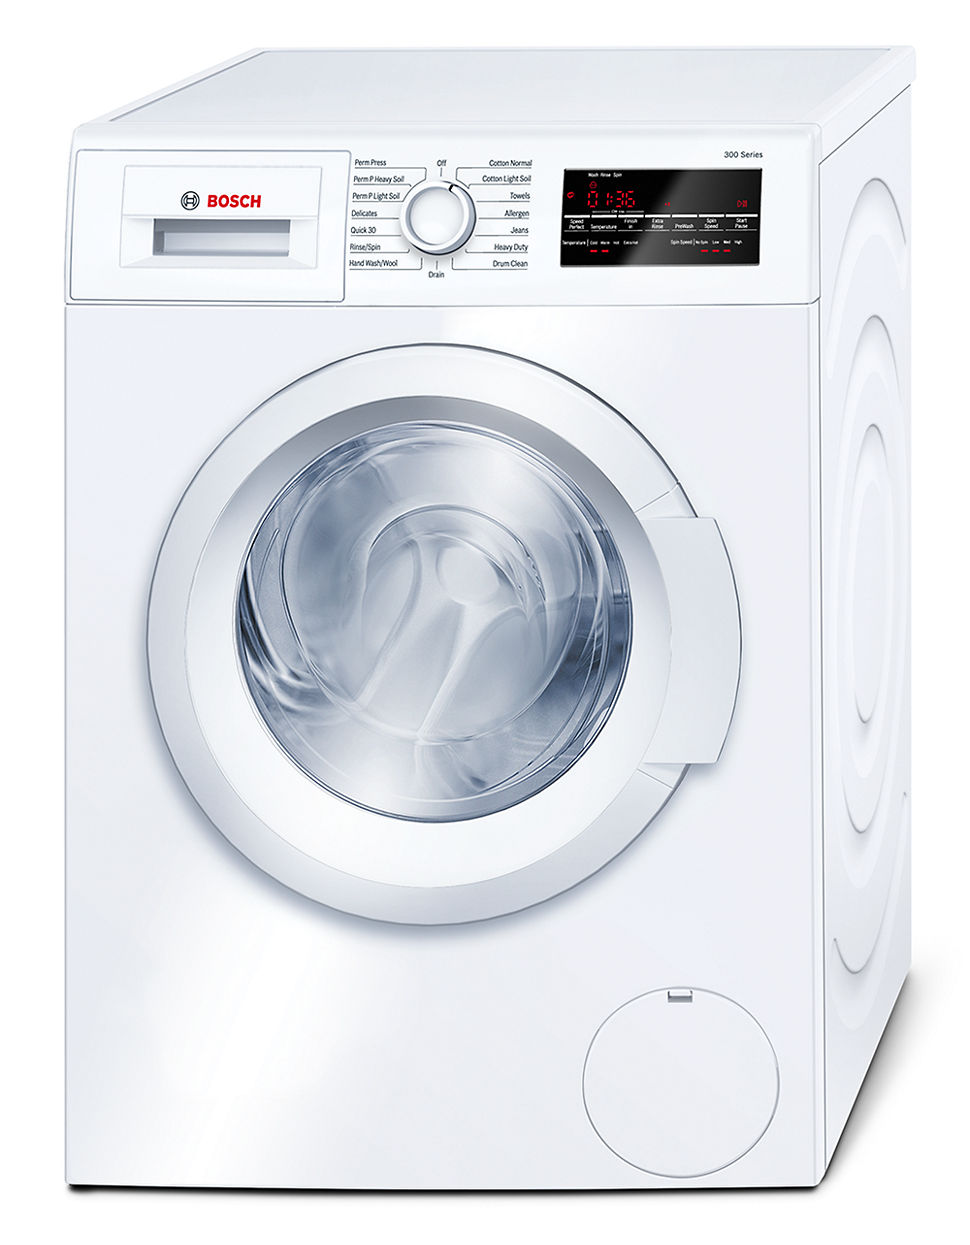 Which store sells dryers for the best price?